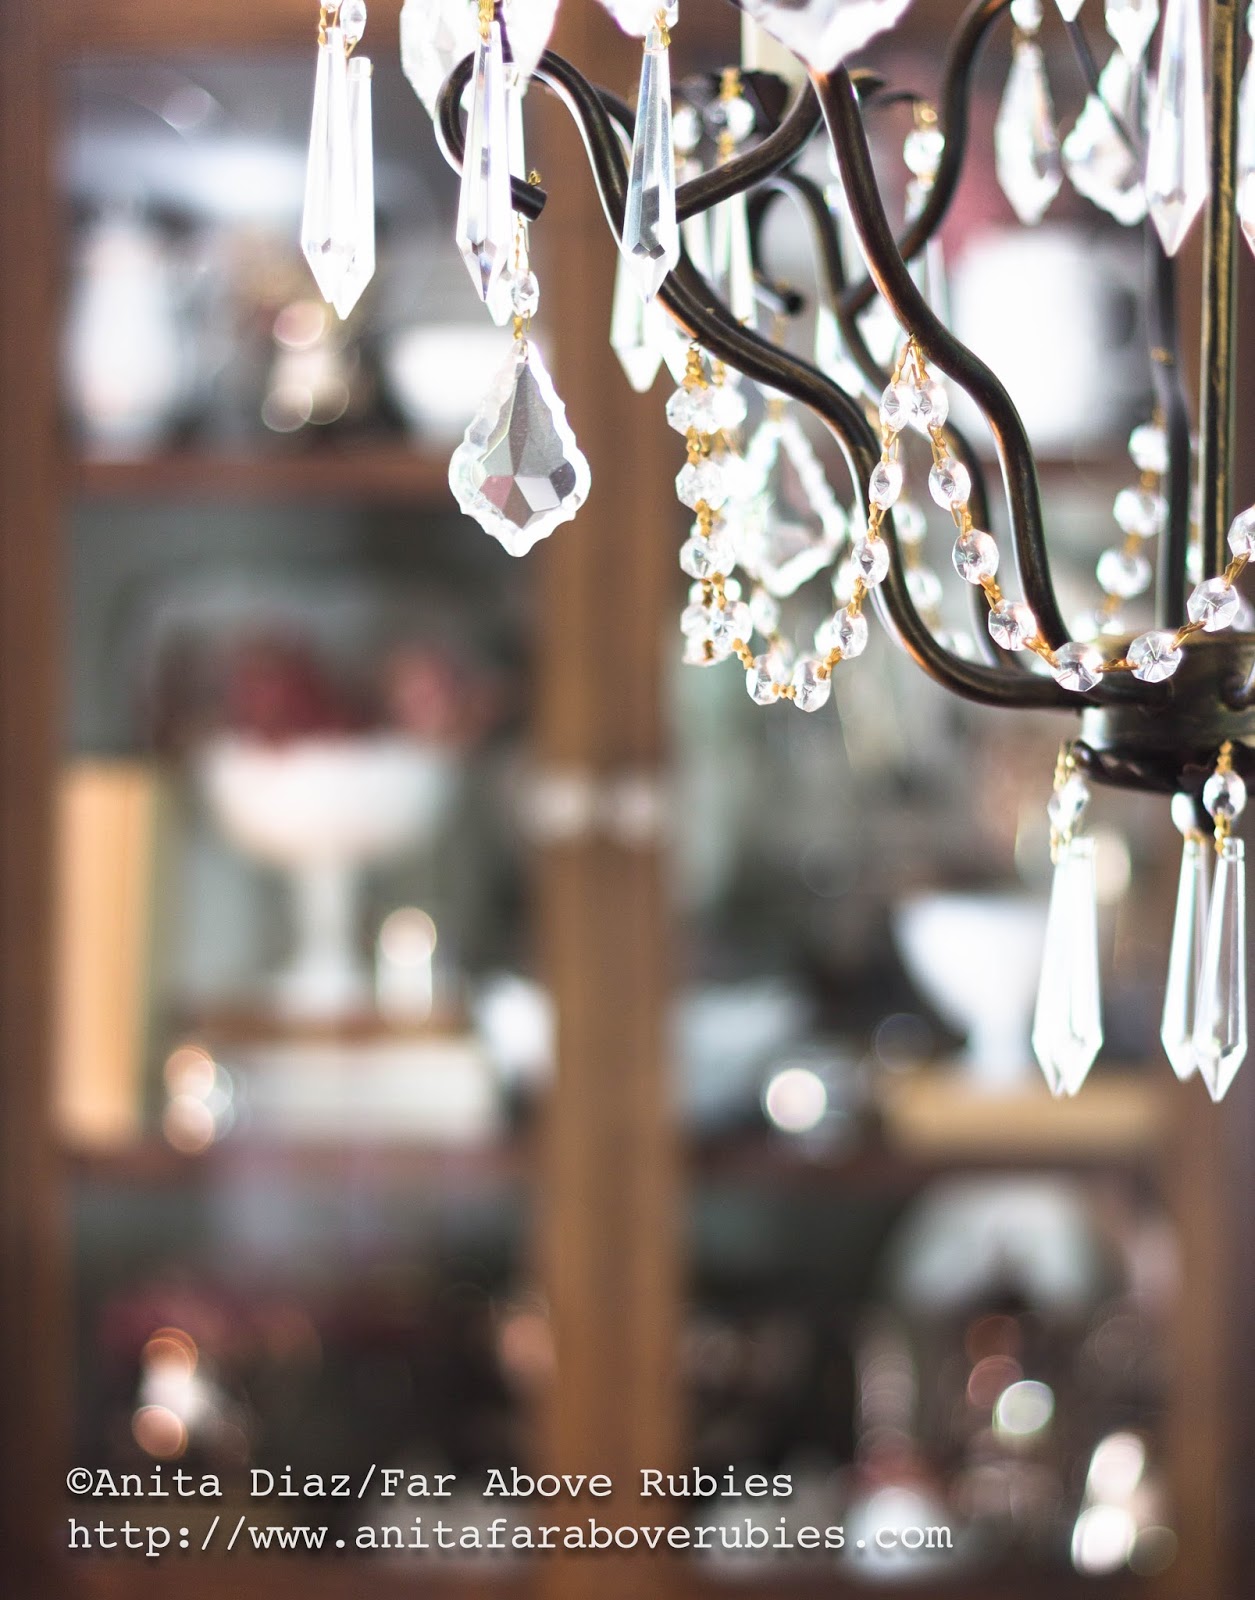 Sparkly chandeliers and a great source for affordable lighting